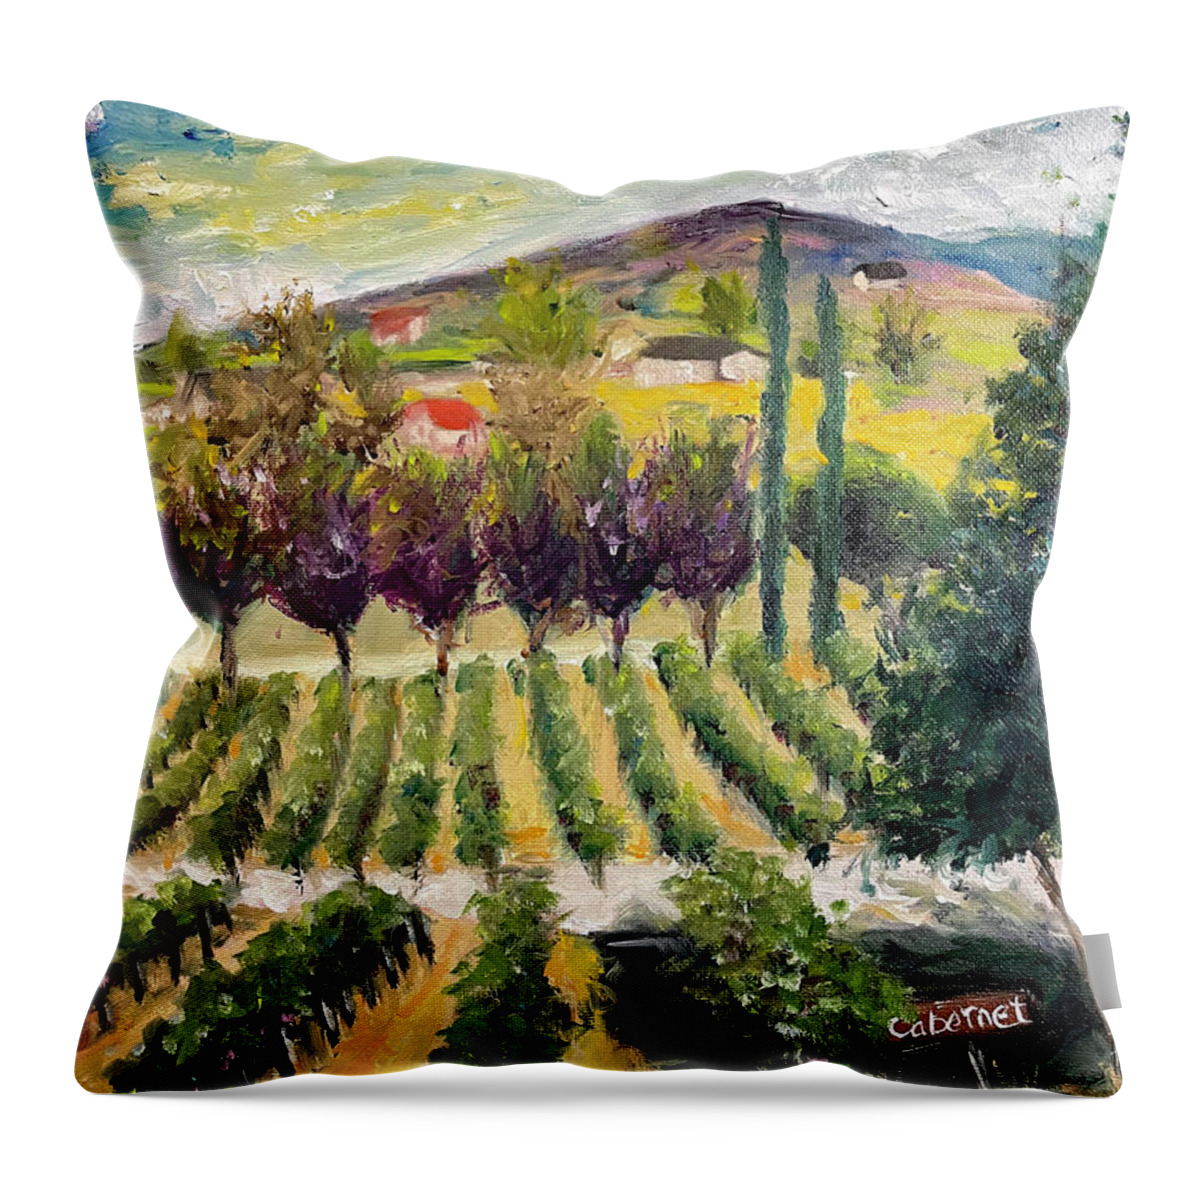 Oak Mountain Throw Pillow featuring the painting Cabernet Lot at Oak Mountain Winery by Roxy Rich